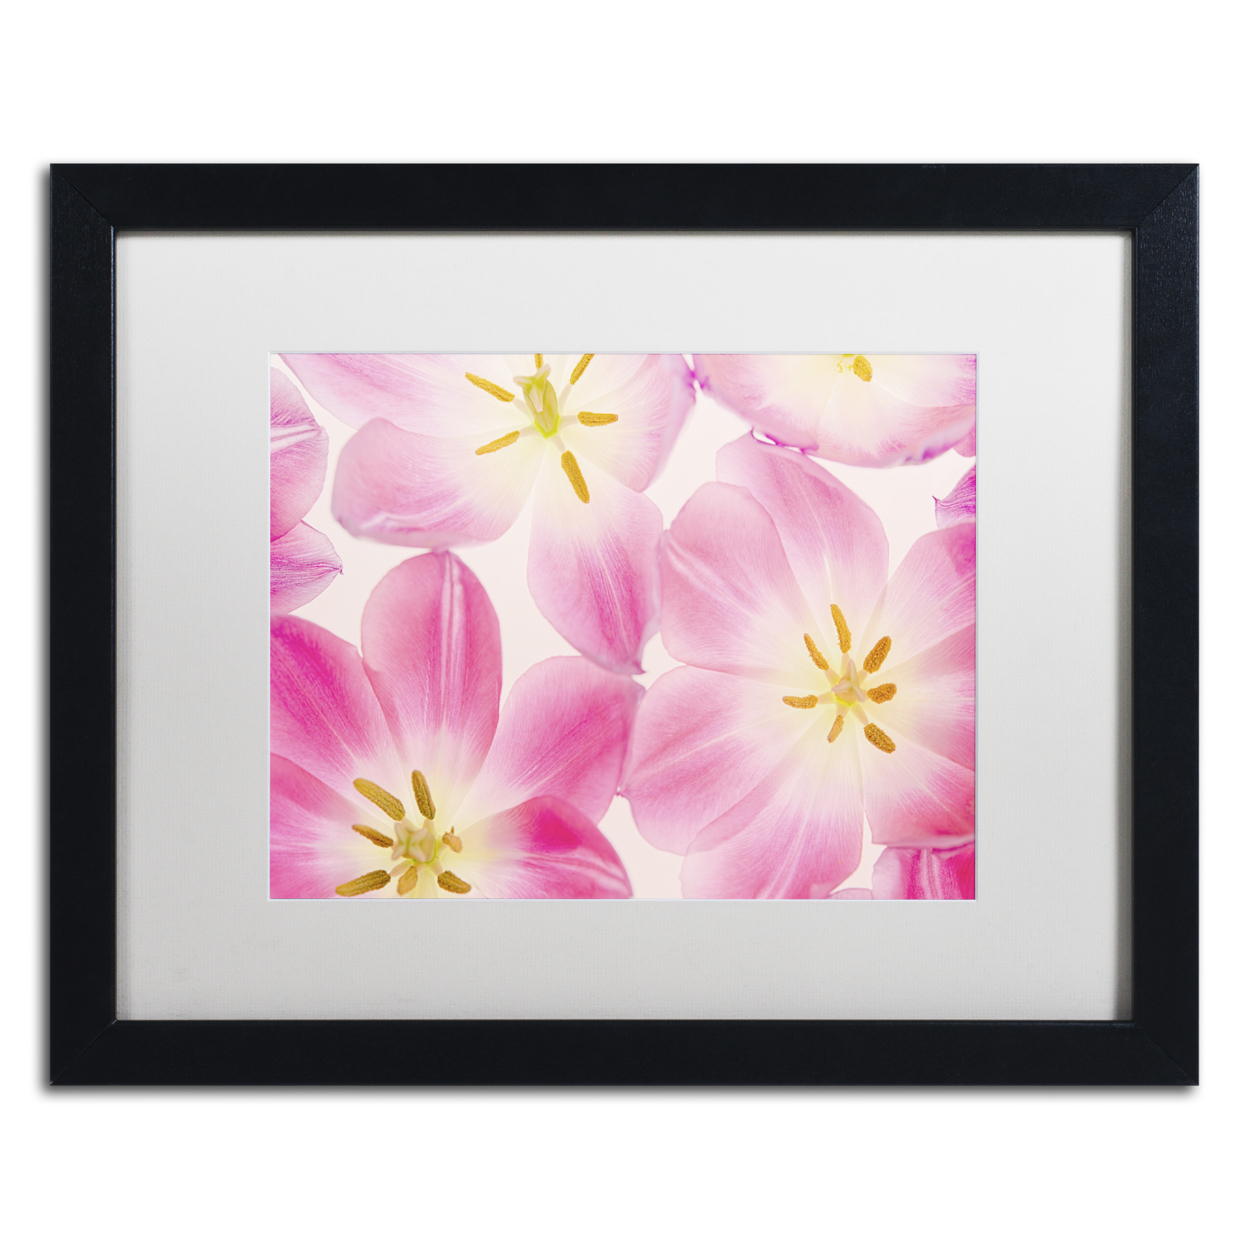 Cora Niele 'Three Cerise Pink Tulips' Black Wooden Framed Art 18 X 22 Inches